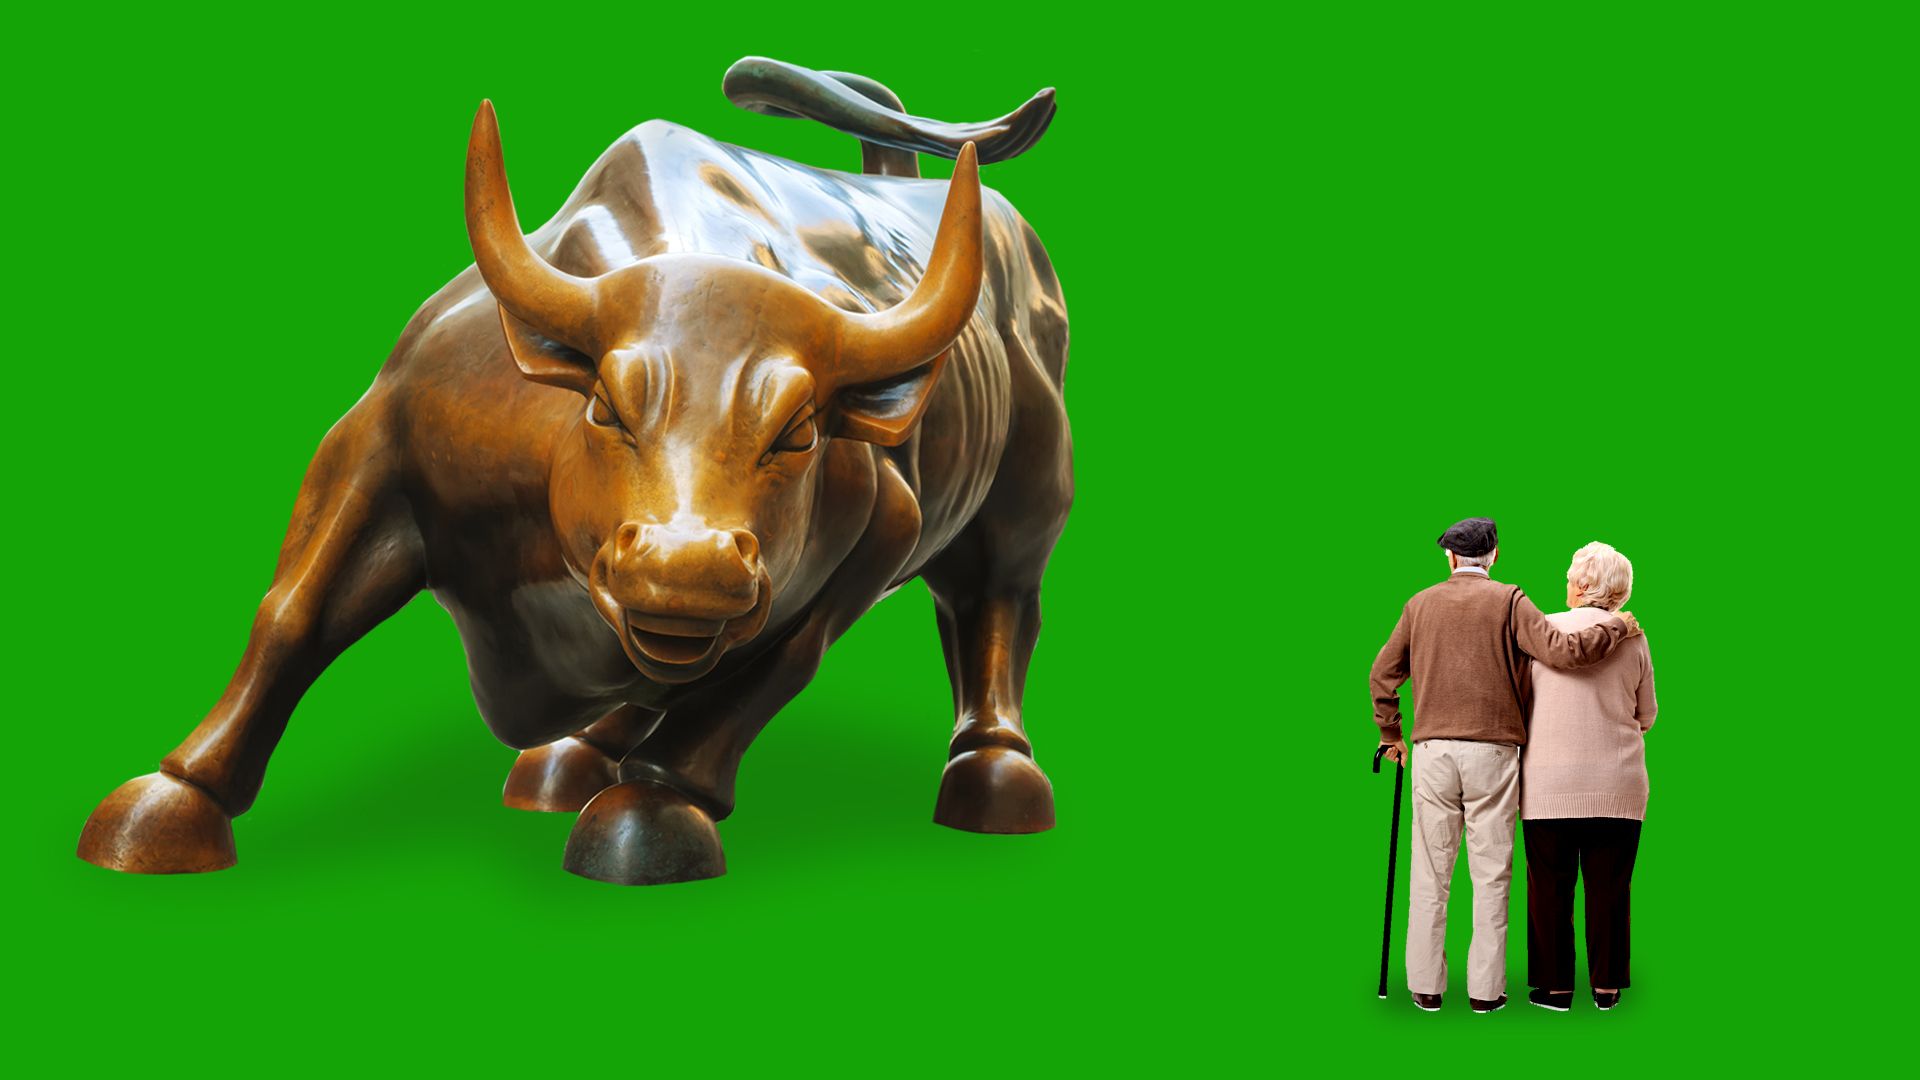 The Wall Street bull staring down mom and pop